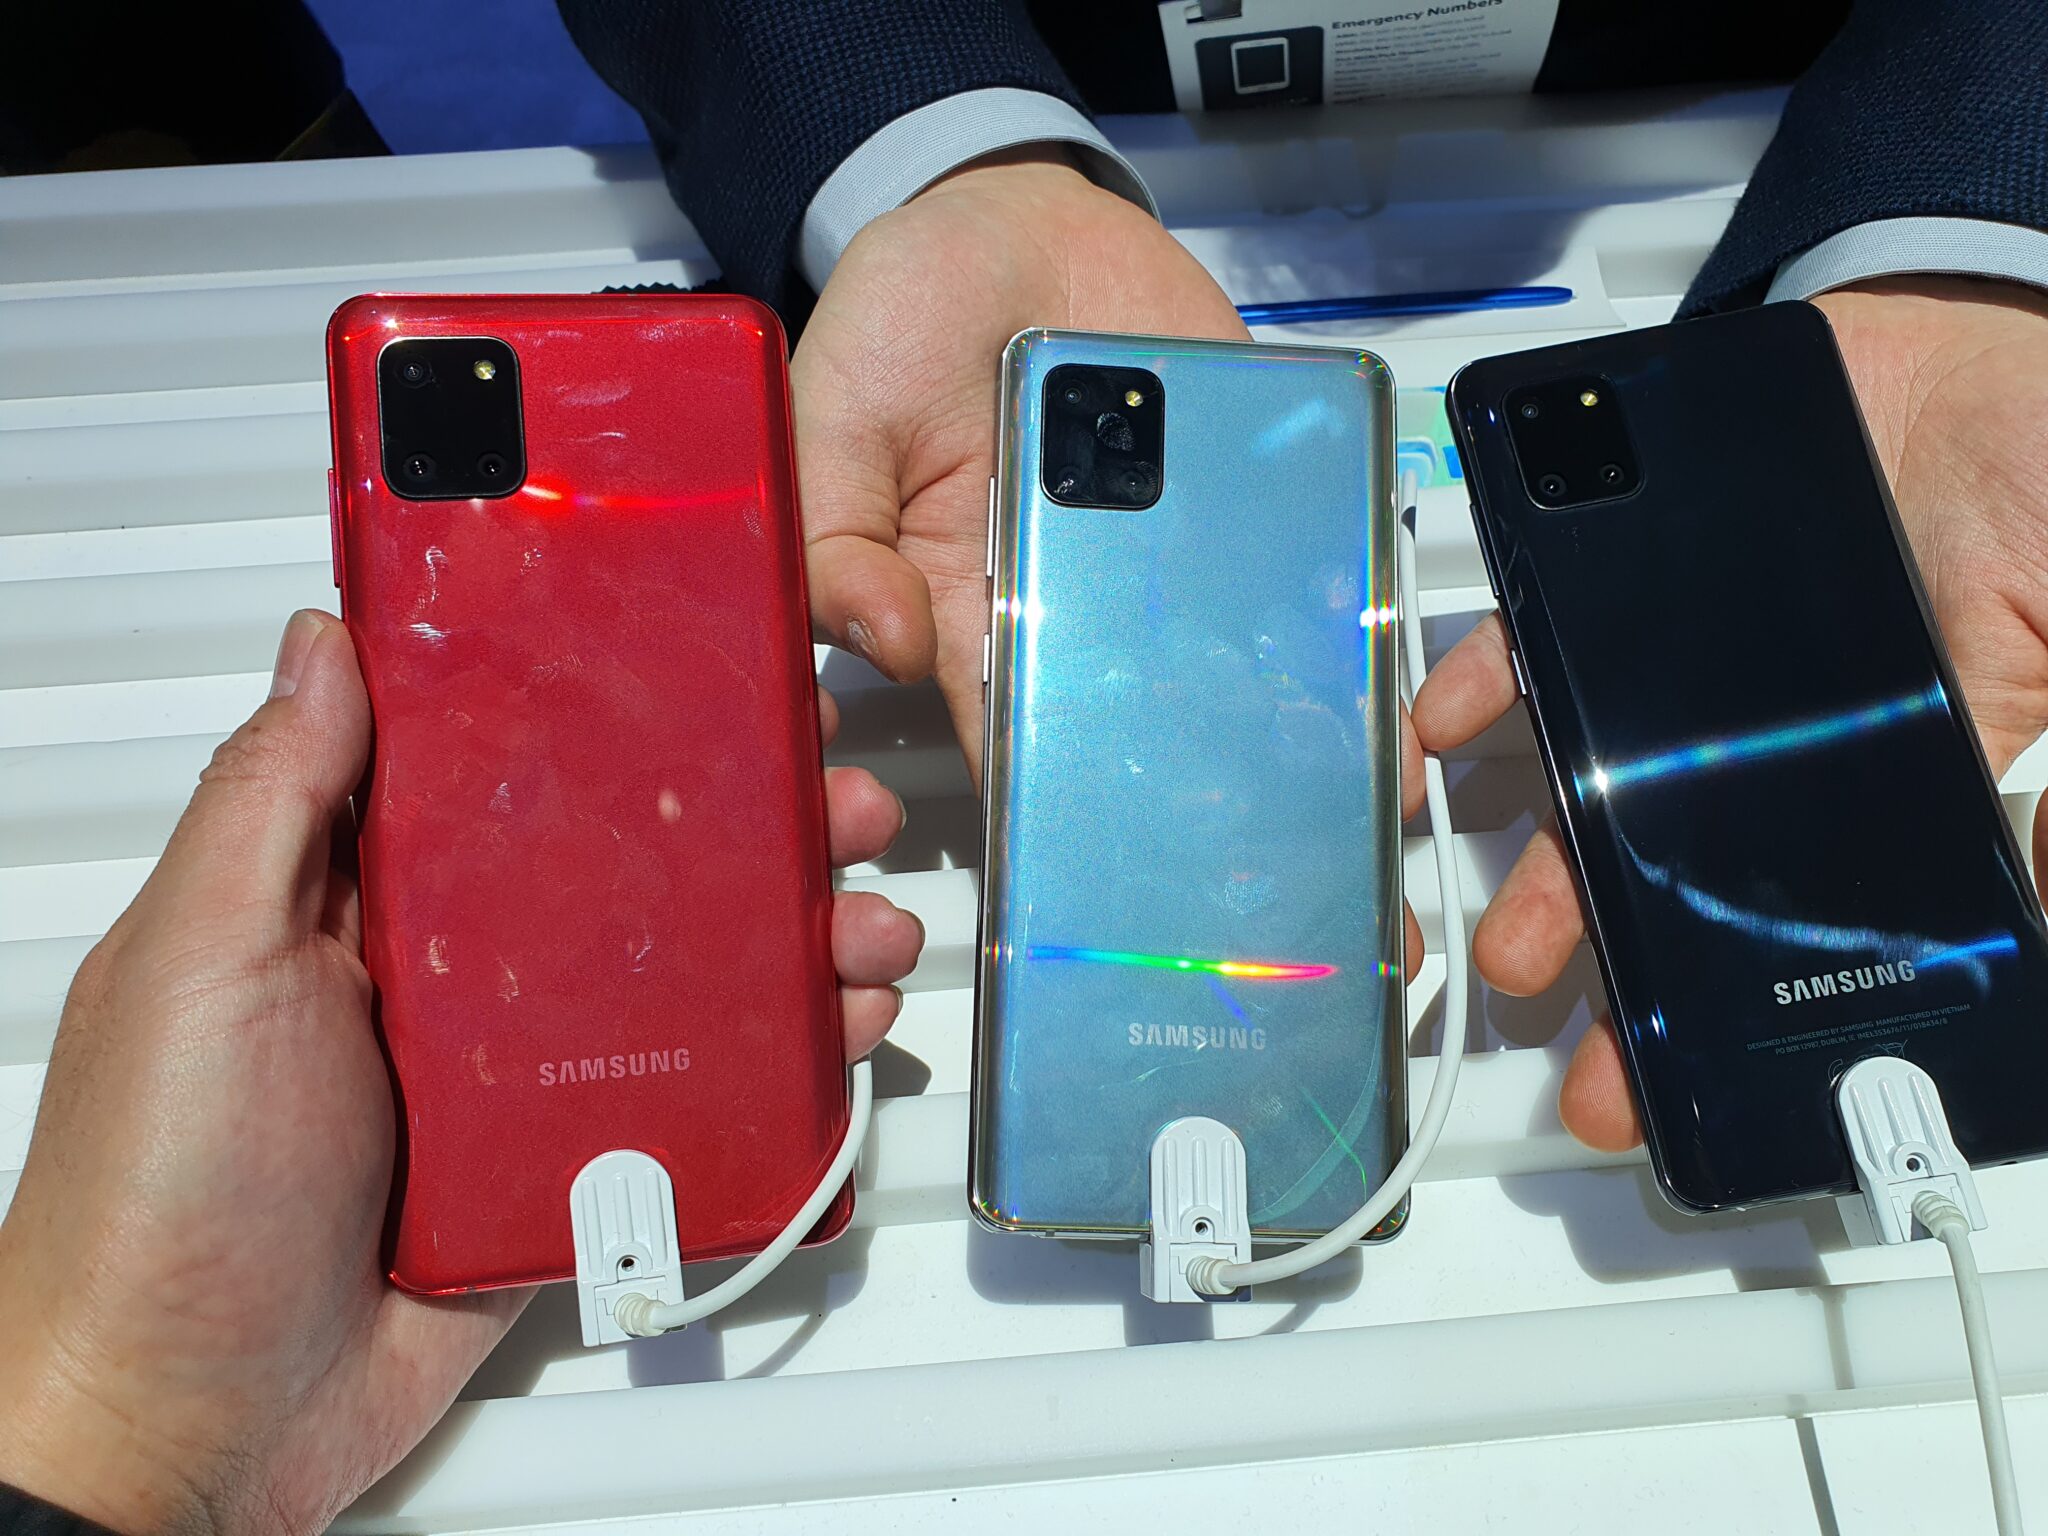 CES 2020: Hands-on with the Samsung Galaxy S10 Lite and Galaxy